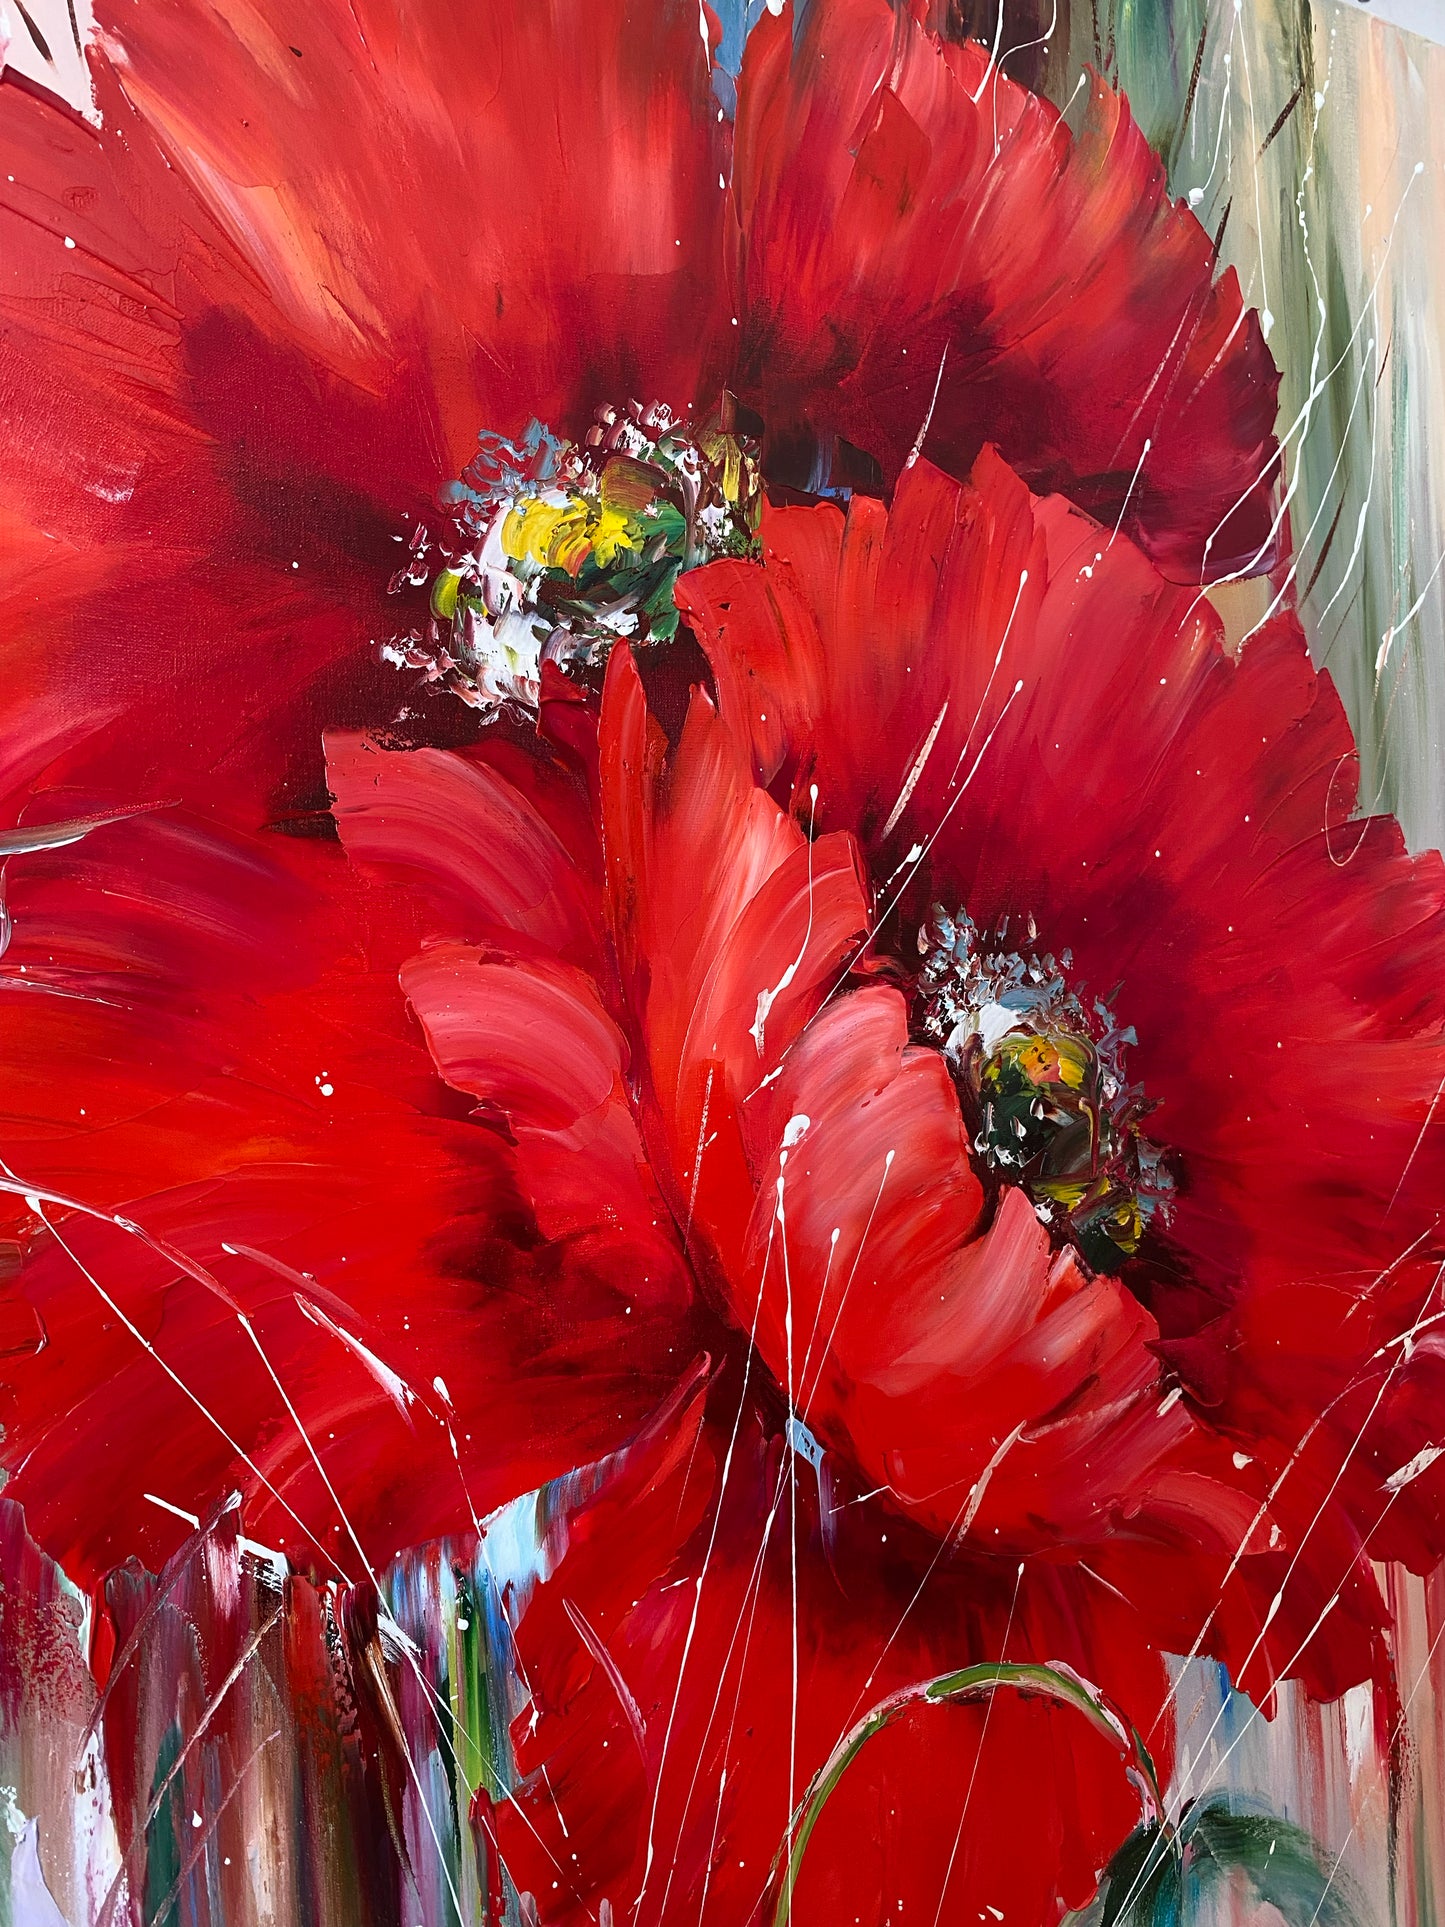 Abstract Red Poppies Painting, Big Flowers Wall Decor, Red Flowers Painting on Canvas, Large Poppy Flower Oil Painting